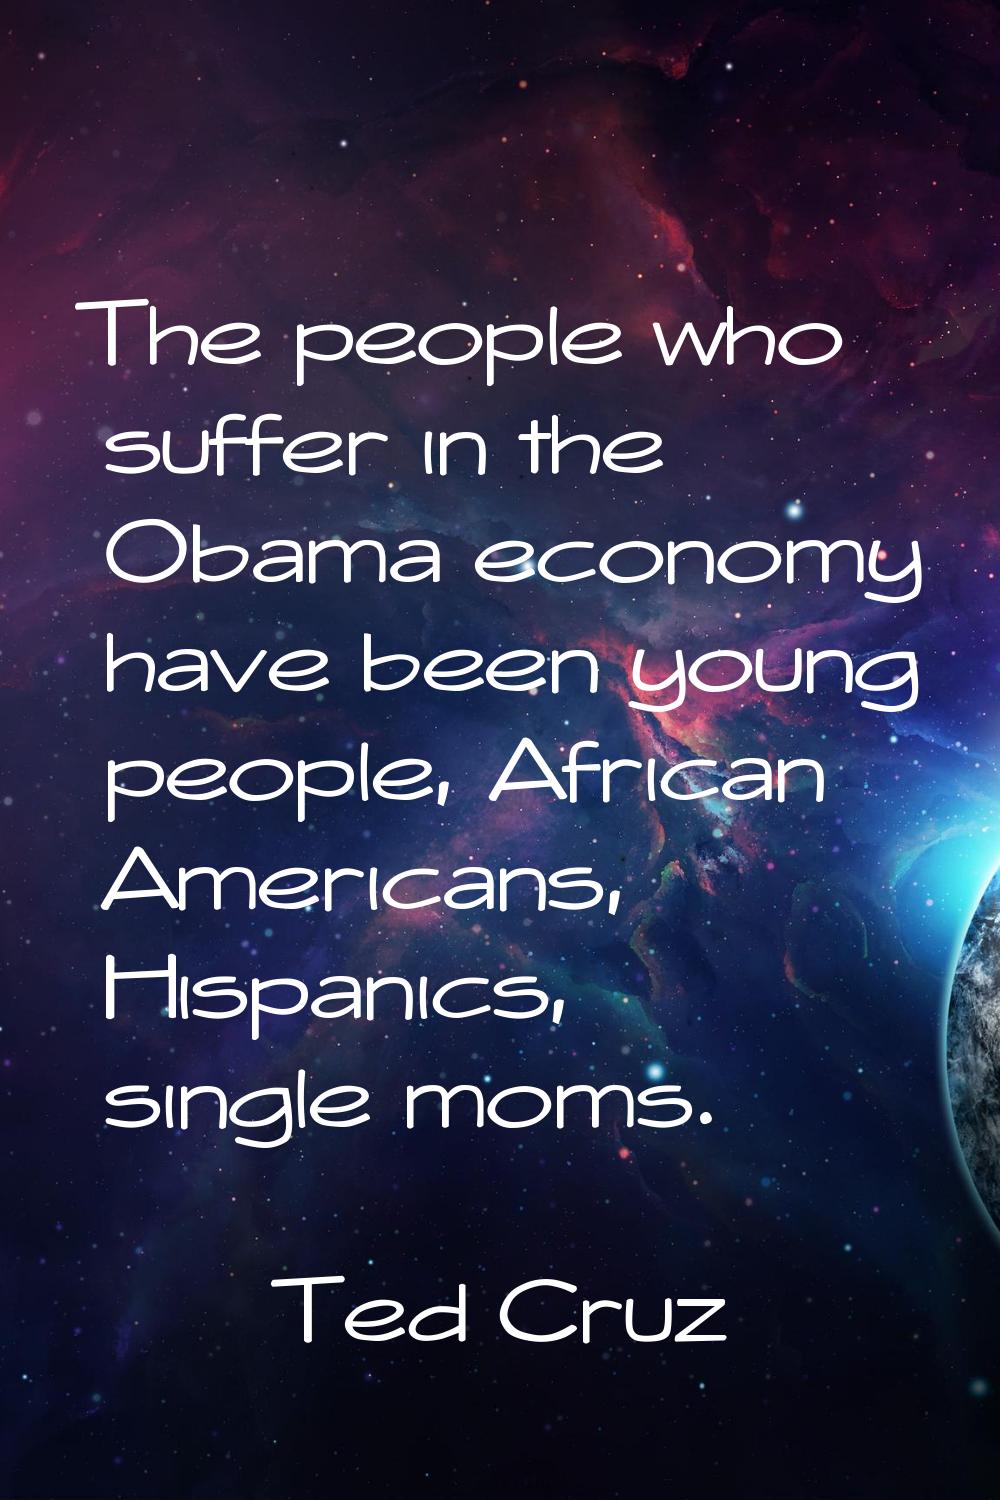 The people who suffer in the Obama economy have been young people, African Americans, Hispanics, si